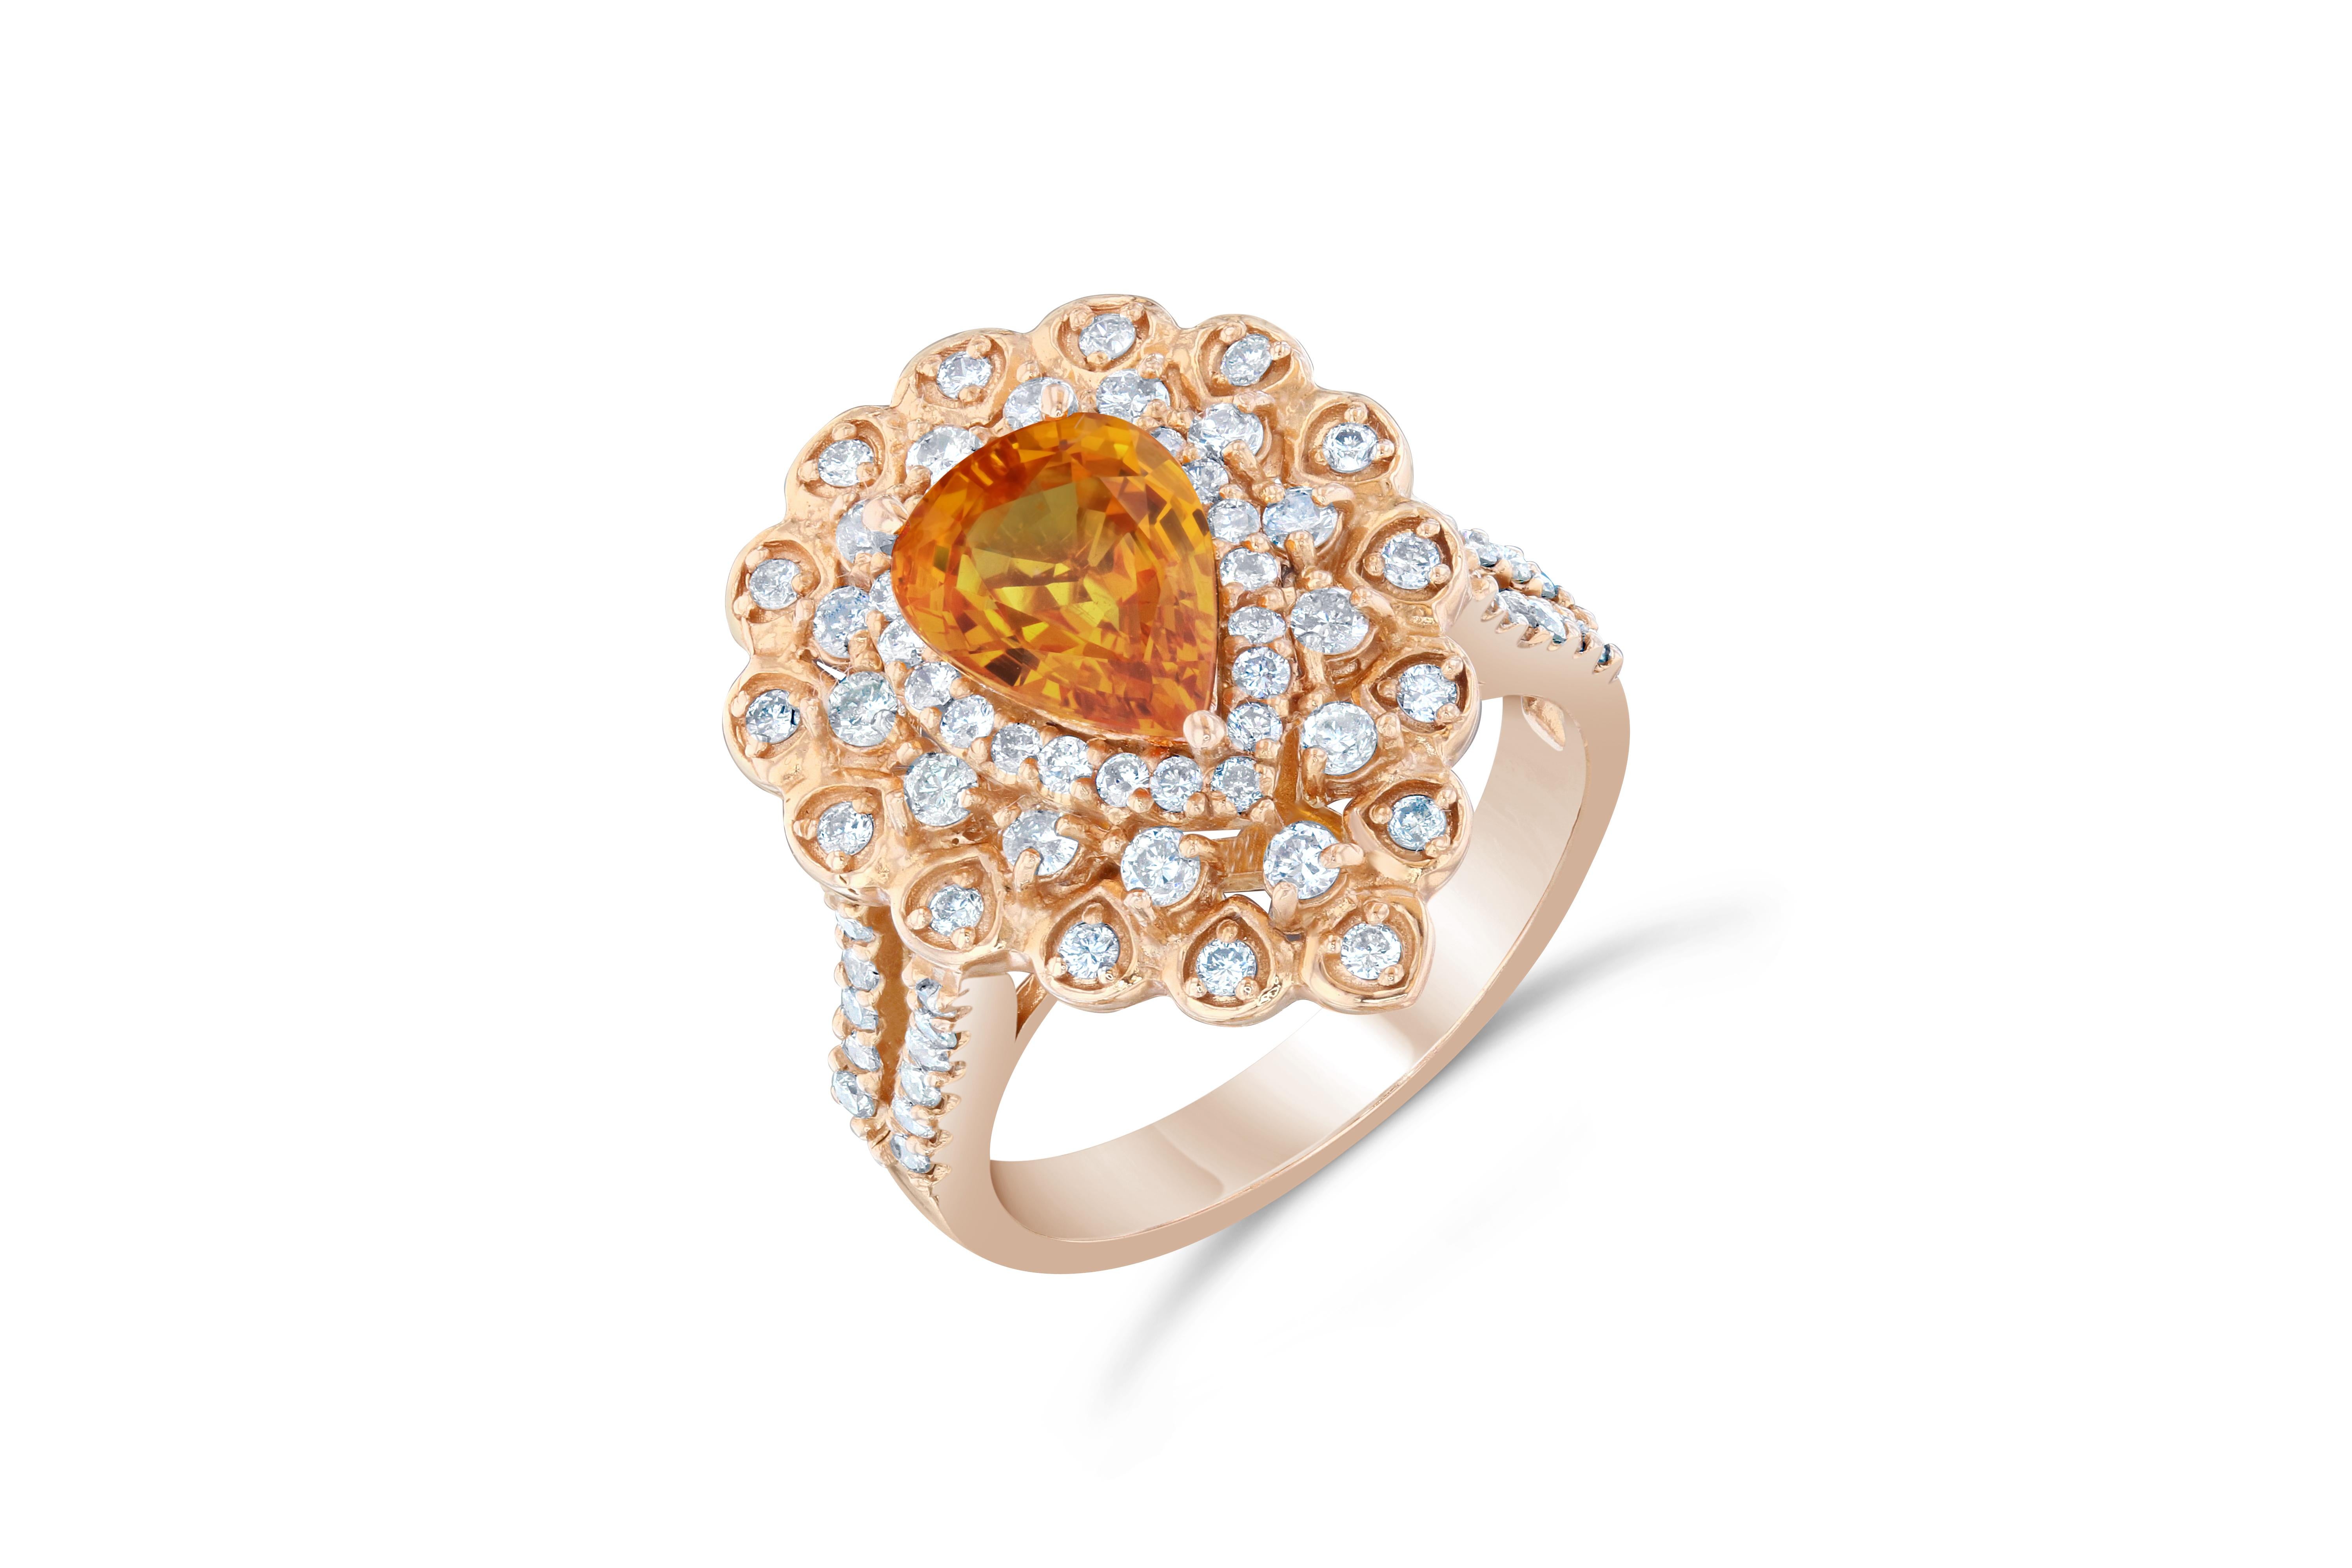 This beautiful ring has a Natural Pear Cut Orange Sapphire that weighs 2.14 Carats. 

It has 74 beautiful Round Cut Diamonds adorning the orange sapphire and they weigh 0.88 Carats. The diamonds have a clarity and color of VS-H. The total carat